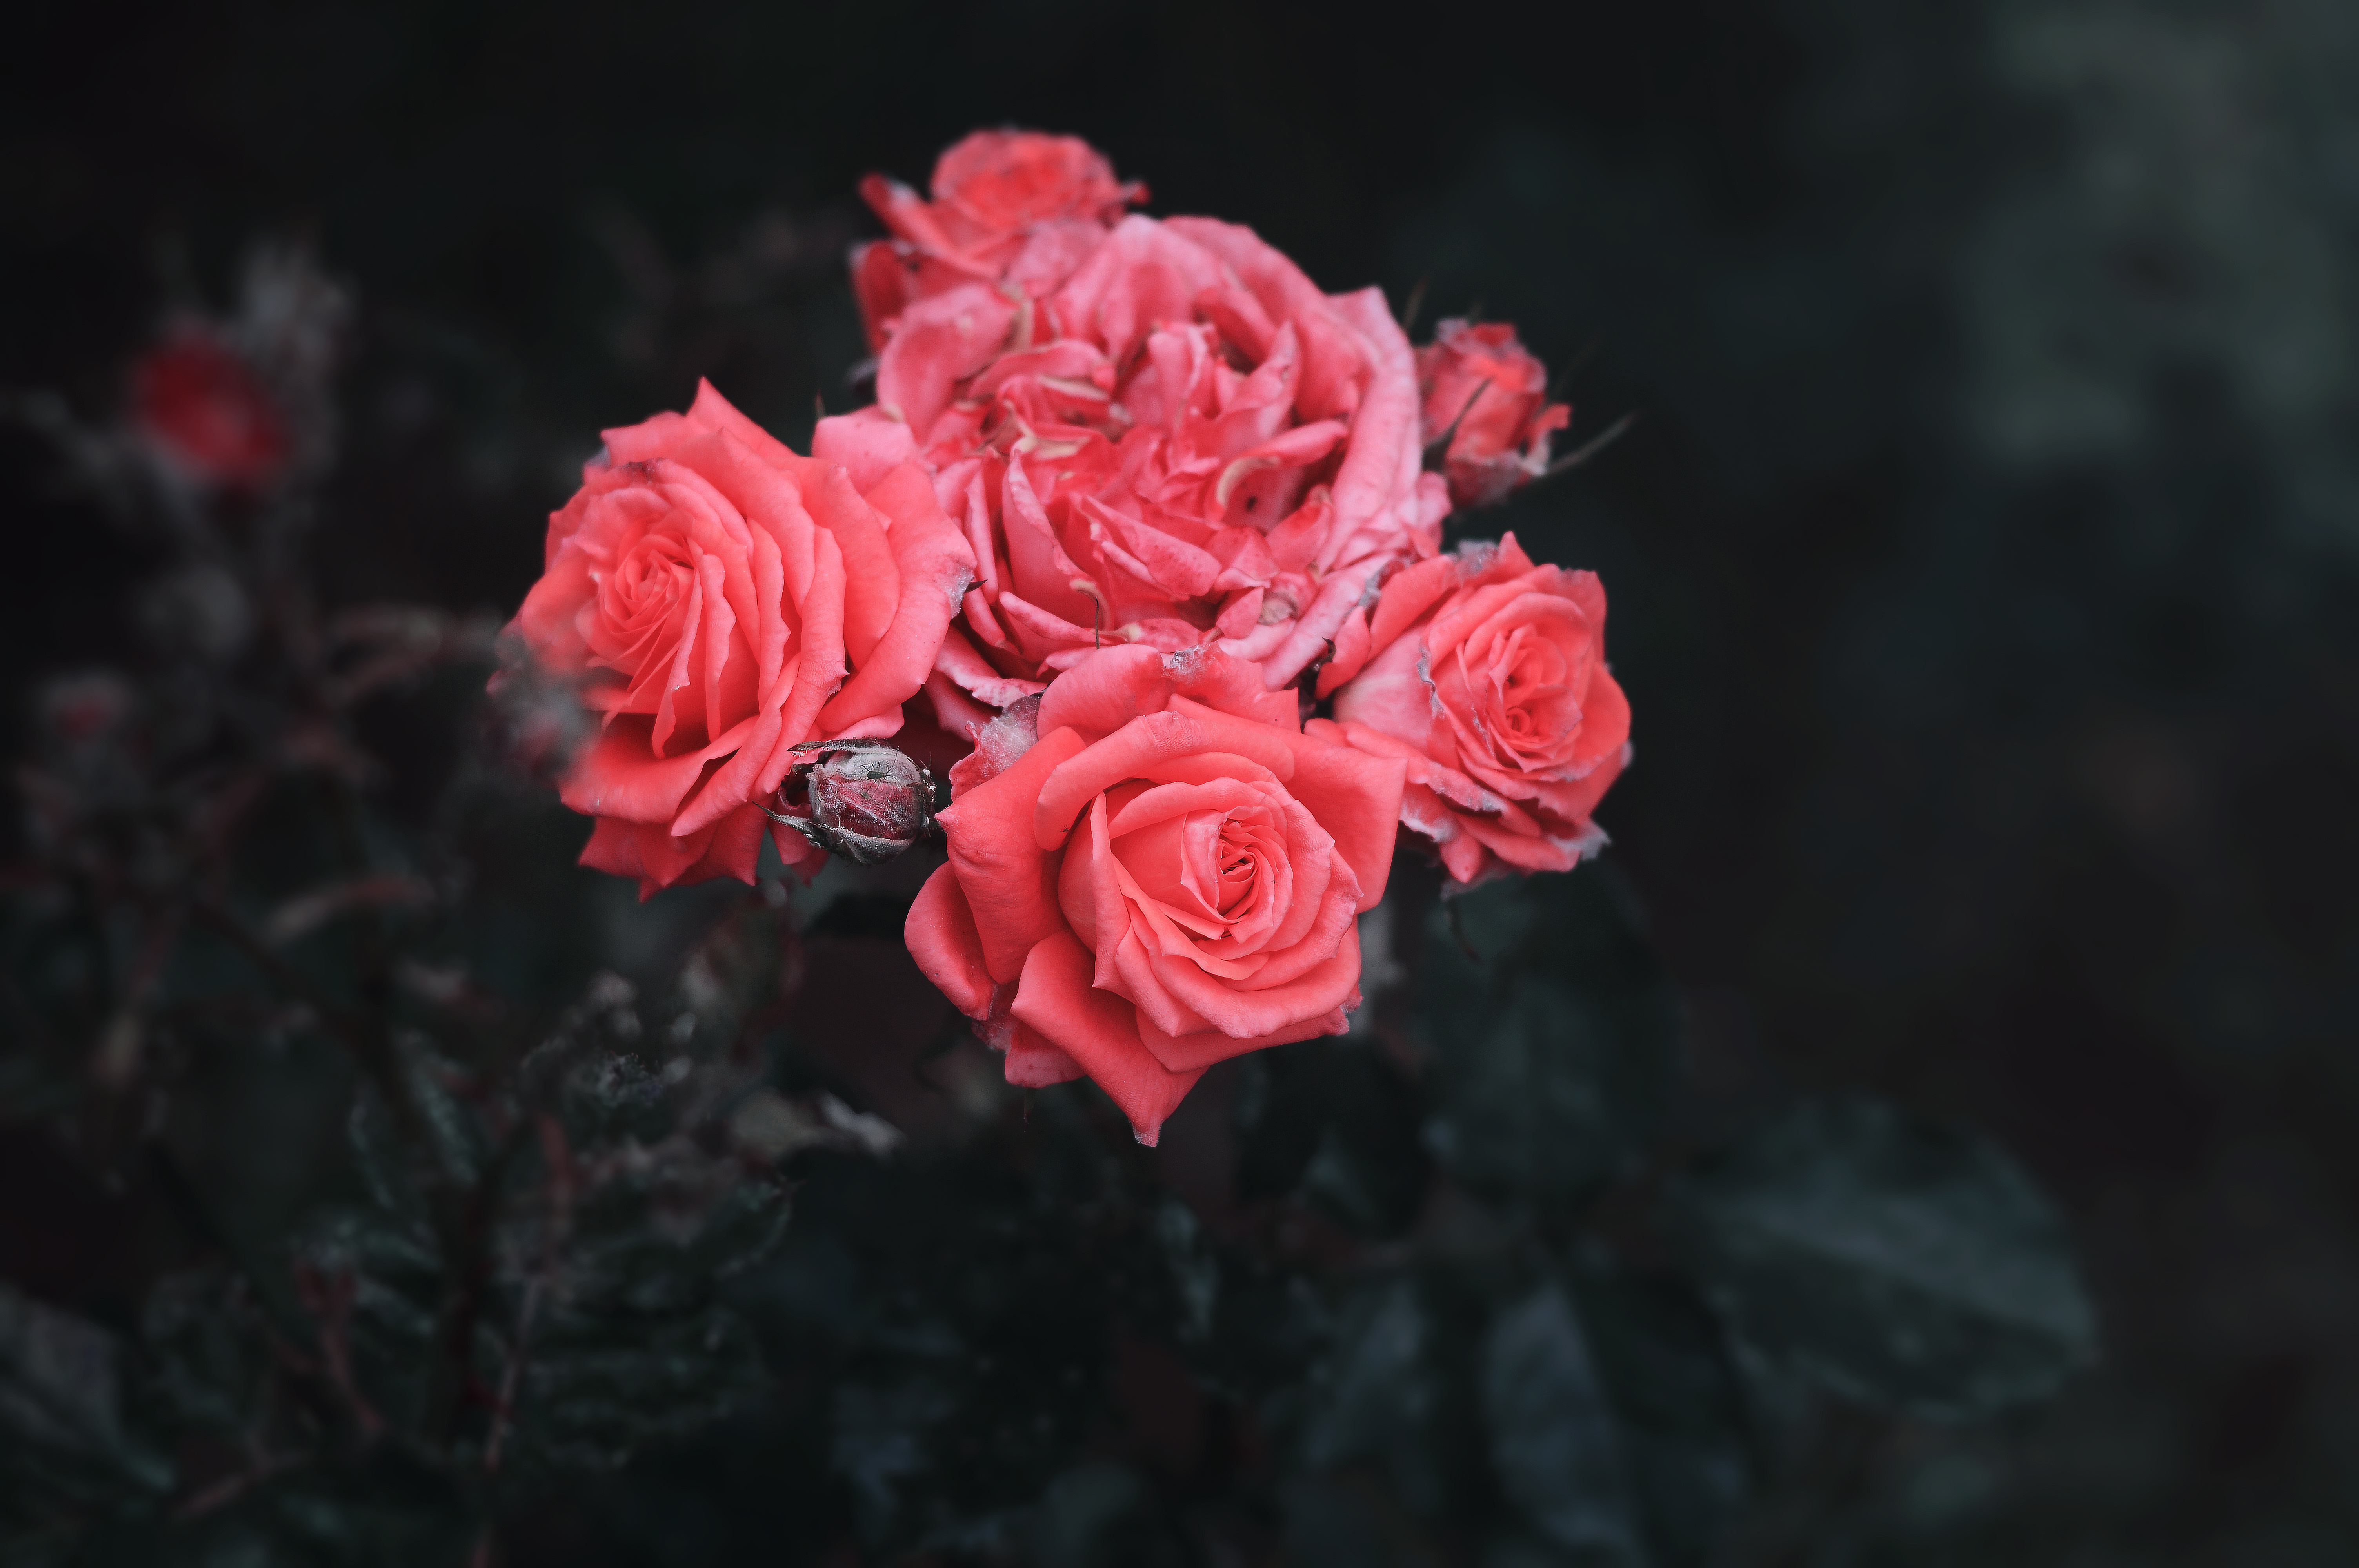 106957 download wallpaper flowers, roses, bush, buds screensavers and pictures for free